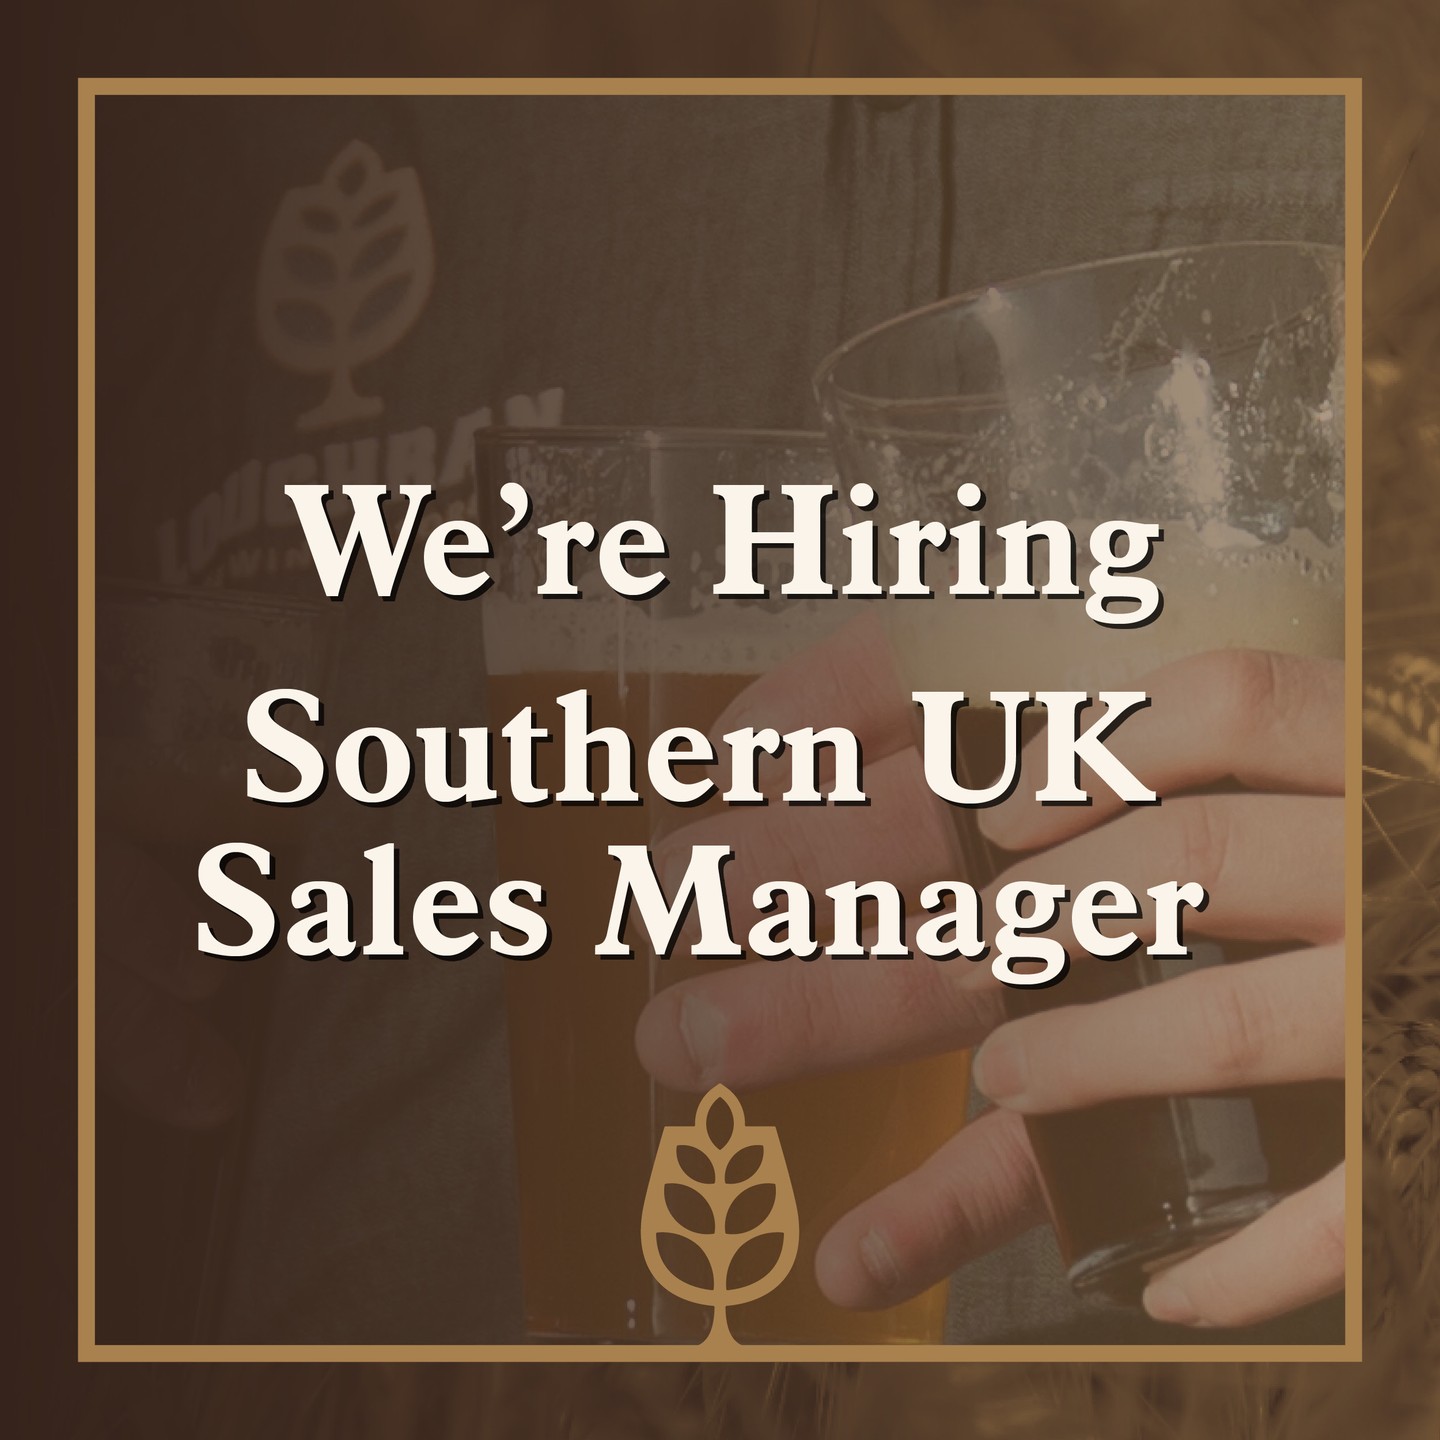 ** WE'RE HIRING - Southern UK Sales Manager **

Since we started in 2014 we've been on one hell of a ride and we're still growing. We'd like to add another fantastic person to our already awesome team. 🥰

We're looking for a Southern UK Sales Manager with proven experience in the craft beer industry. The ideal candidate will be based south of Birmingham and will be responsible for all accounts in the southern UK area.

We’re after someone who appreciates great beer and is a self starter who wants to get stuck in and help work towards selling the brilliant brands that we represent.

We need a person with:
✅ Experience in the craft beer industry
✅ Knowledge of ingredients and raw materials
✅ Good interpersonal skills
✅ The ability to implement a sale strategy in a sales funnel manner
✅ The ability to work alone and as part of a team
✅ The ability to think on their feet to help customers solve problems
✅ The ability to balance sustainability with profitability
✅ A sound person to have pints and food with. 🍻

Job Type: Full-time
Salary: Negotiable

Additional pay:
✅ Monthly/yearly bonus structure

Benefits:
✅ Travel
✅ Company events

Schedule:
✅ Monday-Friday with occasional weekend/events

If this sounds like you, or a person you know, please email a CV over to will@malt.ie

🍺